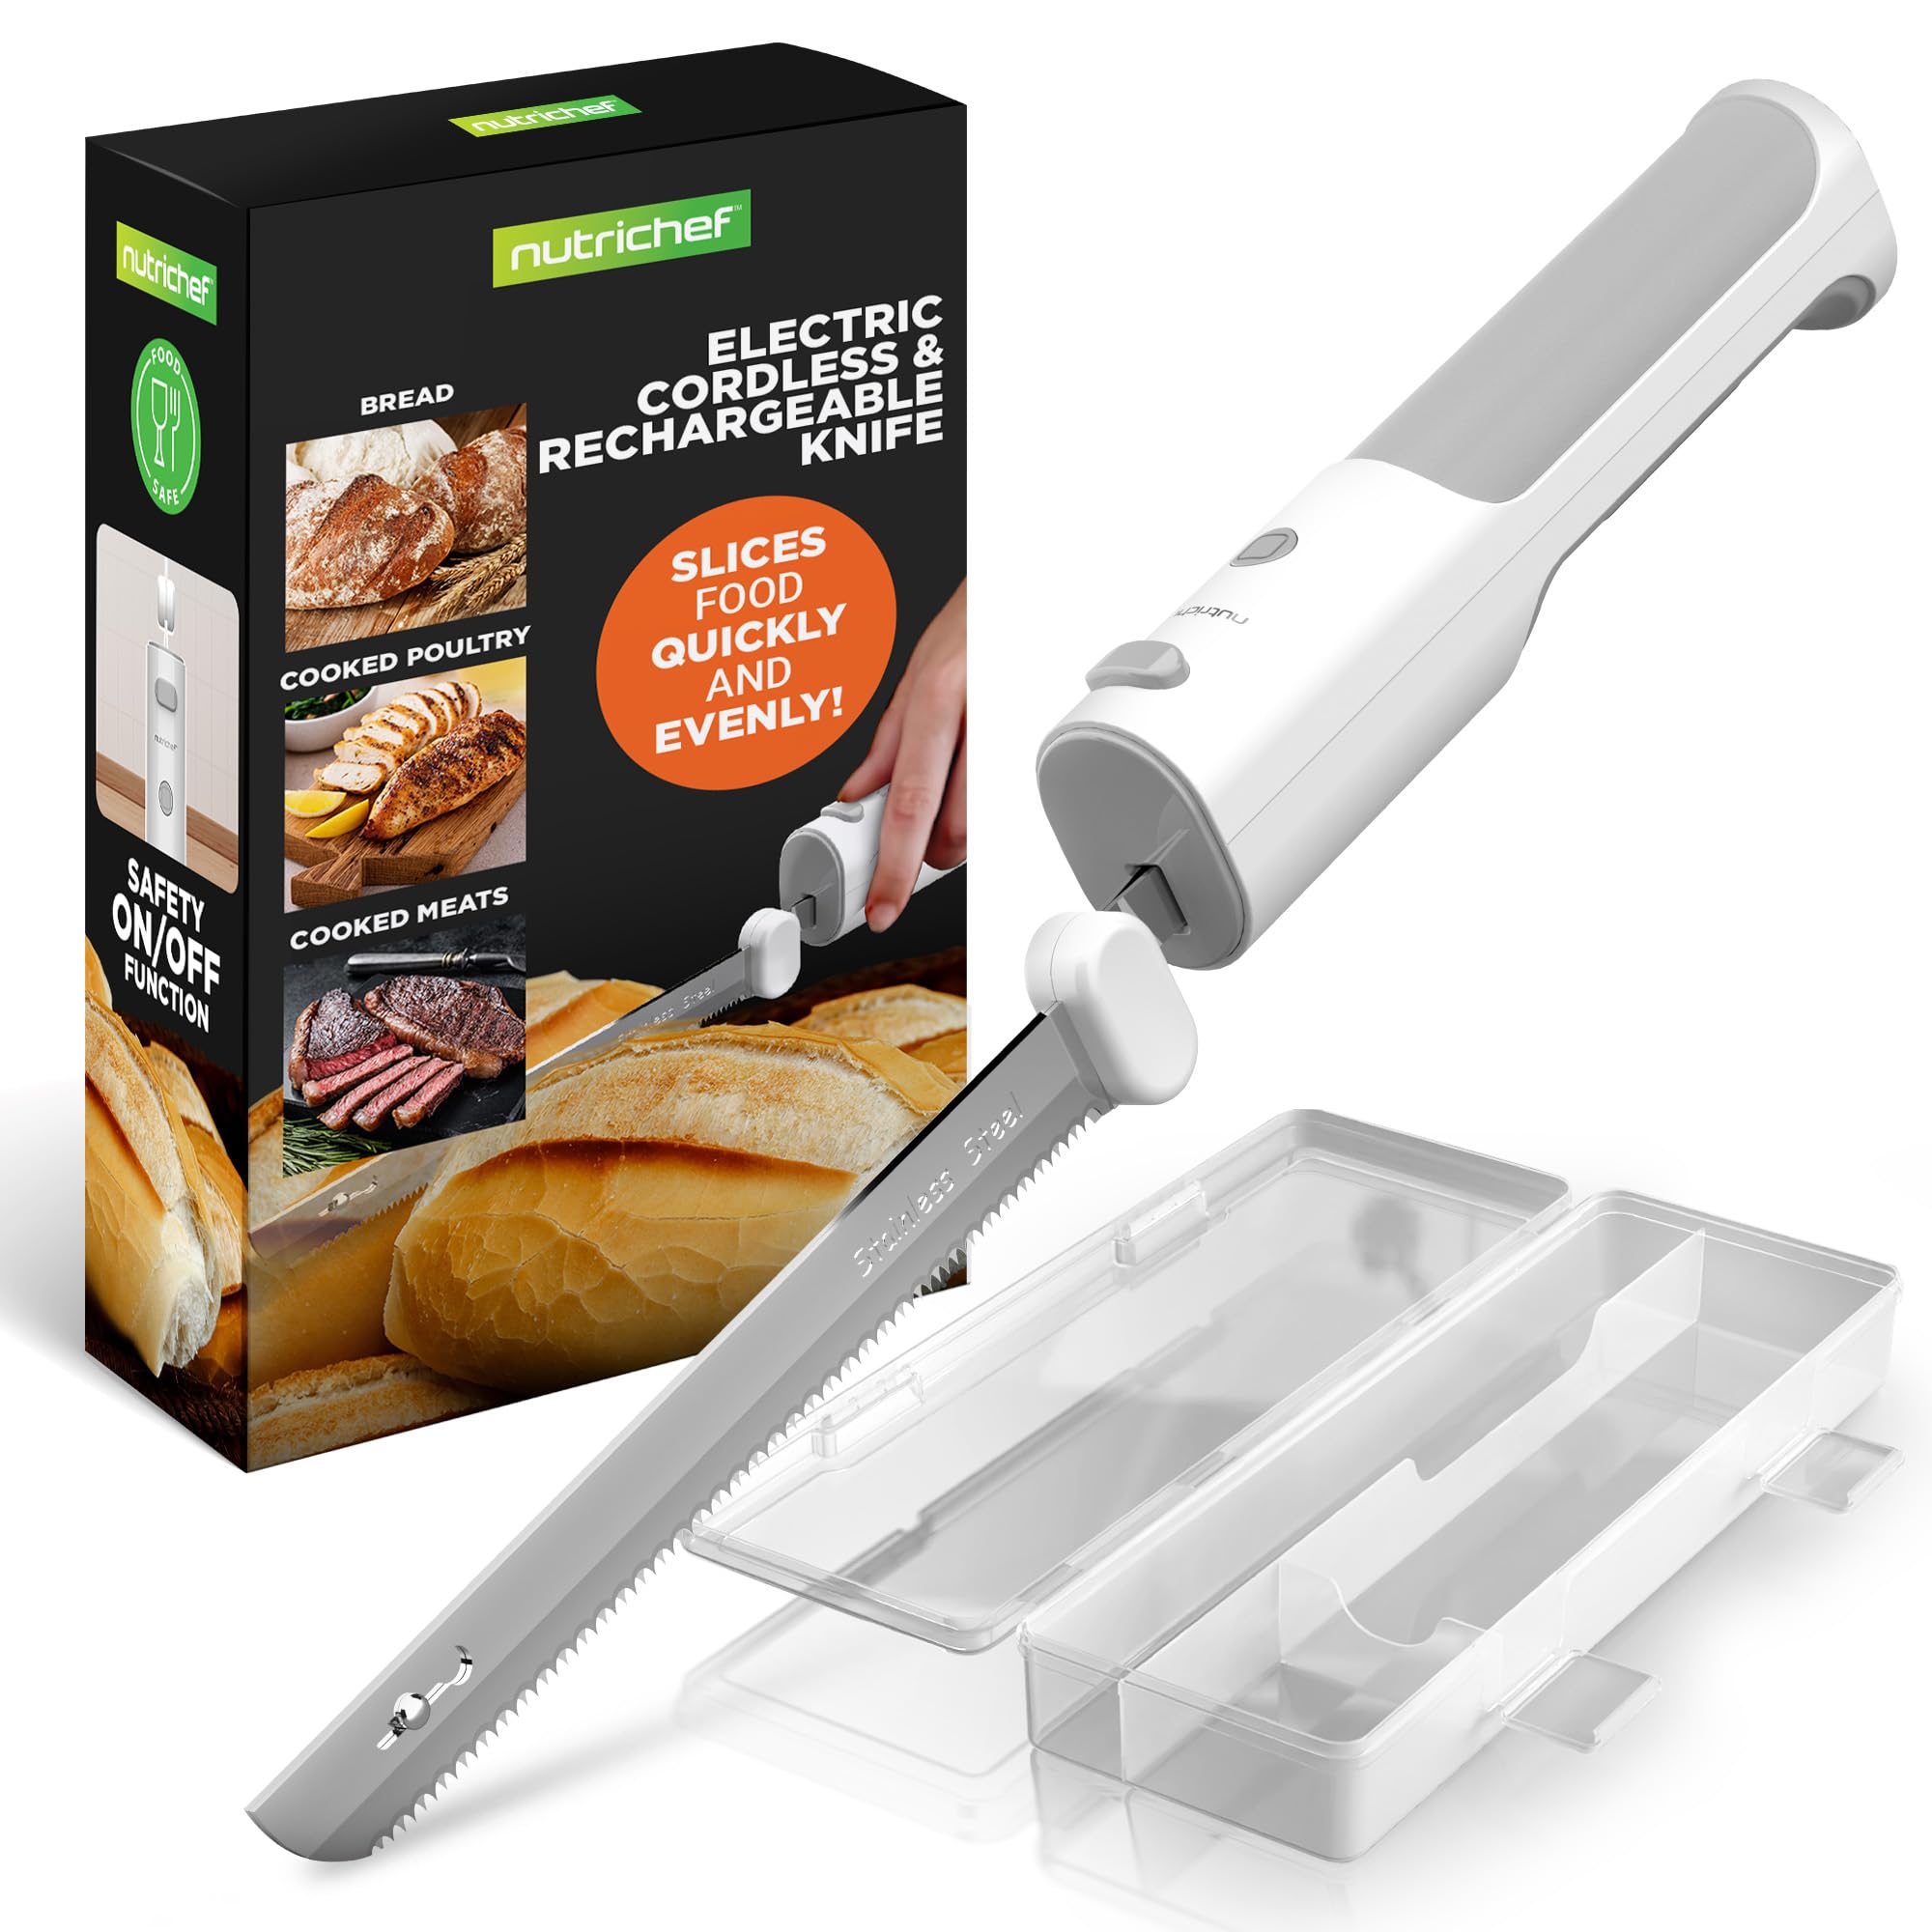 NutriChef Cordless Electric Knife | Easy to Use Constant ON/OFF Safety Function Button | Carve Turkey, Meats, Poultry, Bread, Cheese & More | Lightweight with Contoured Grip Handle (White & Grey)